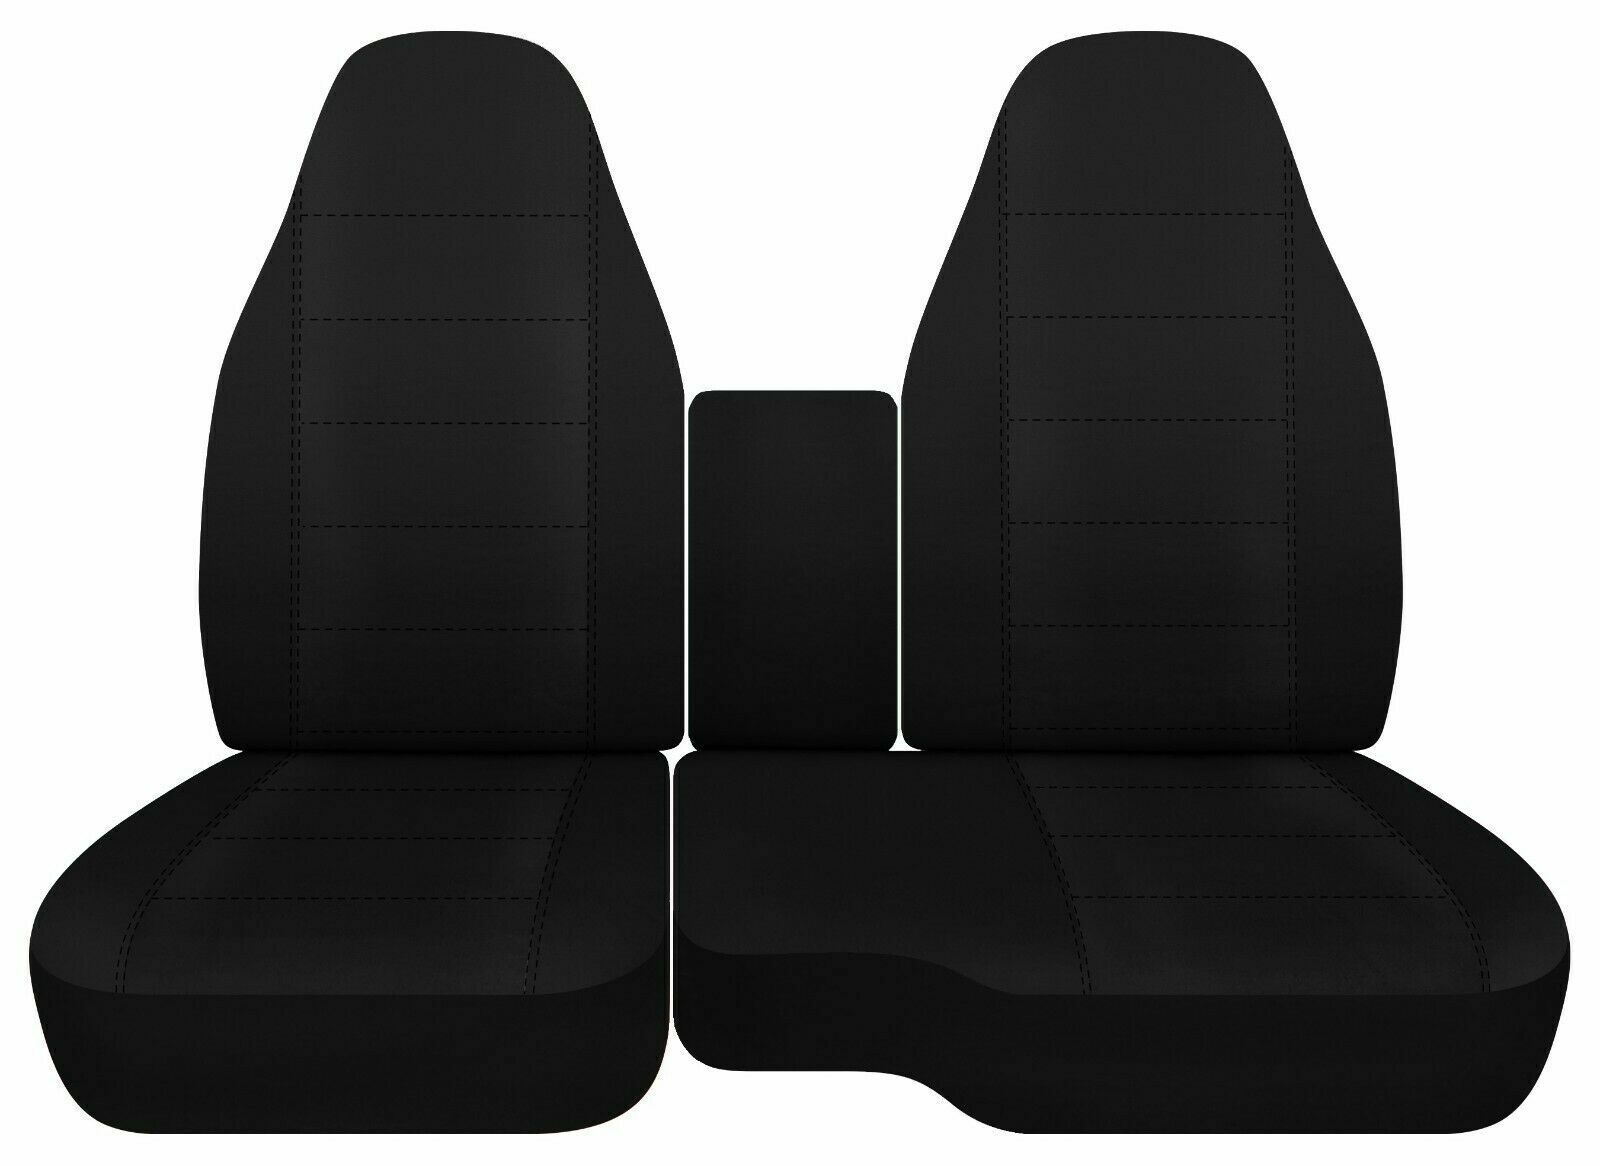 Designcovers For Ford Ranger Front Seat Cover 1991-2012 Charcoal Cotton